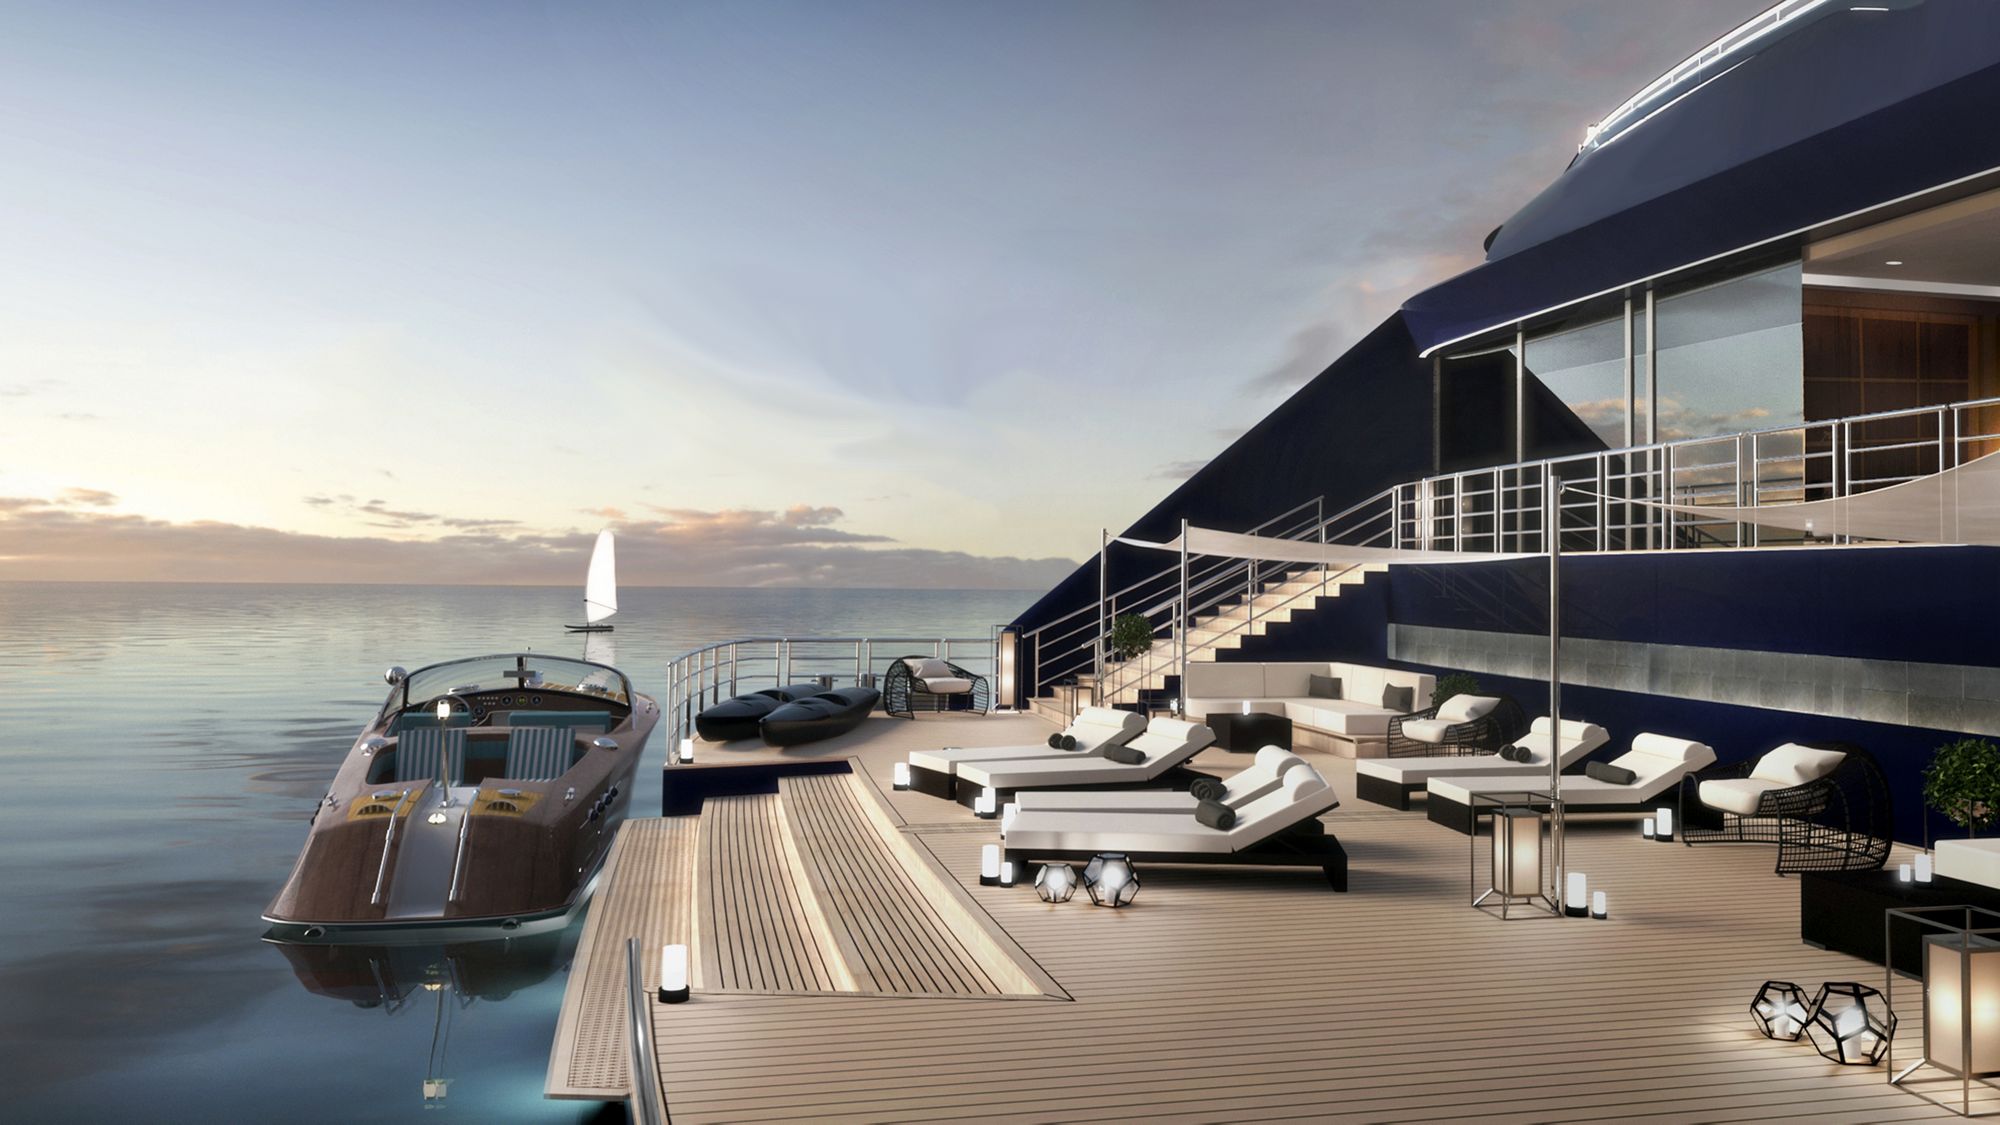 Ships ahoy: The Ritz-Carlton launches a new luxury cruise line